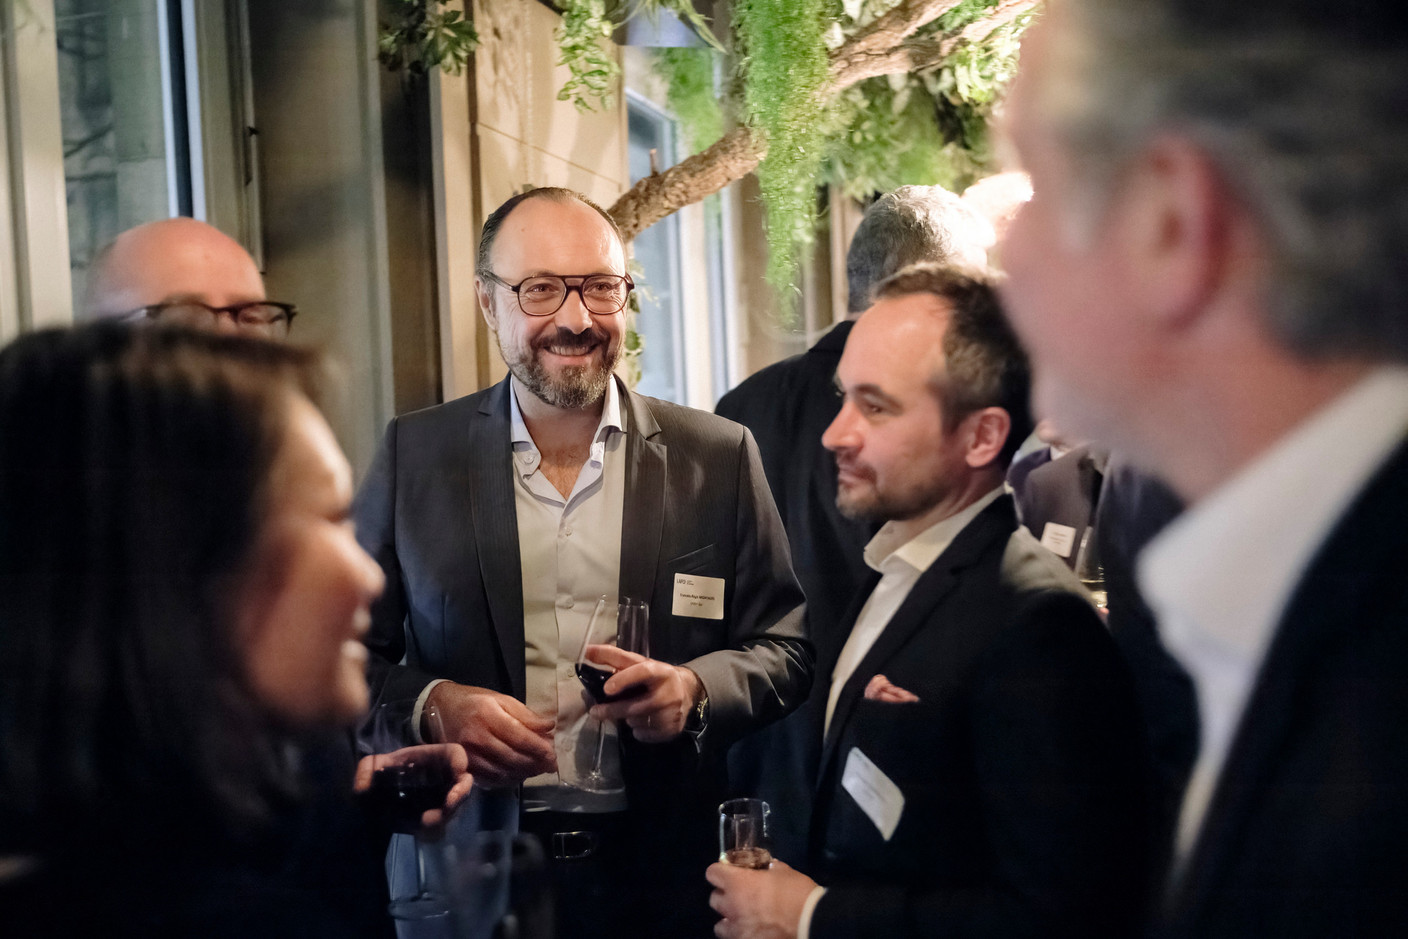 François-Régis Montazel (Spirit Asset Management) at the Luxembourg Association of Family Offices (LAFO) winter 2023 cocktail, which took place on 8 February 2023 at Hertz PopUp. Photo: Jan Hanrion for LAFO